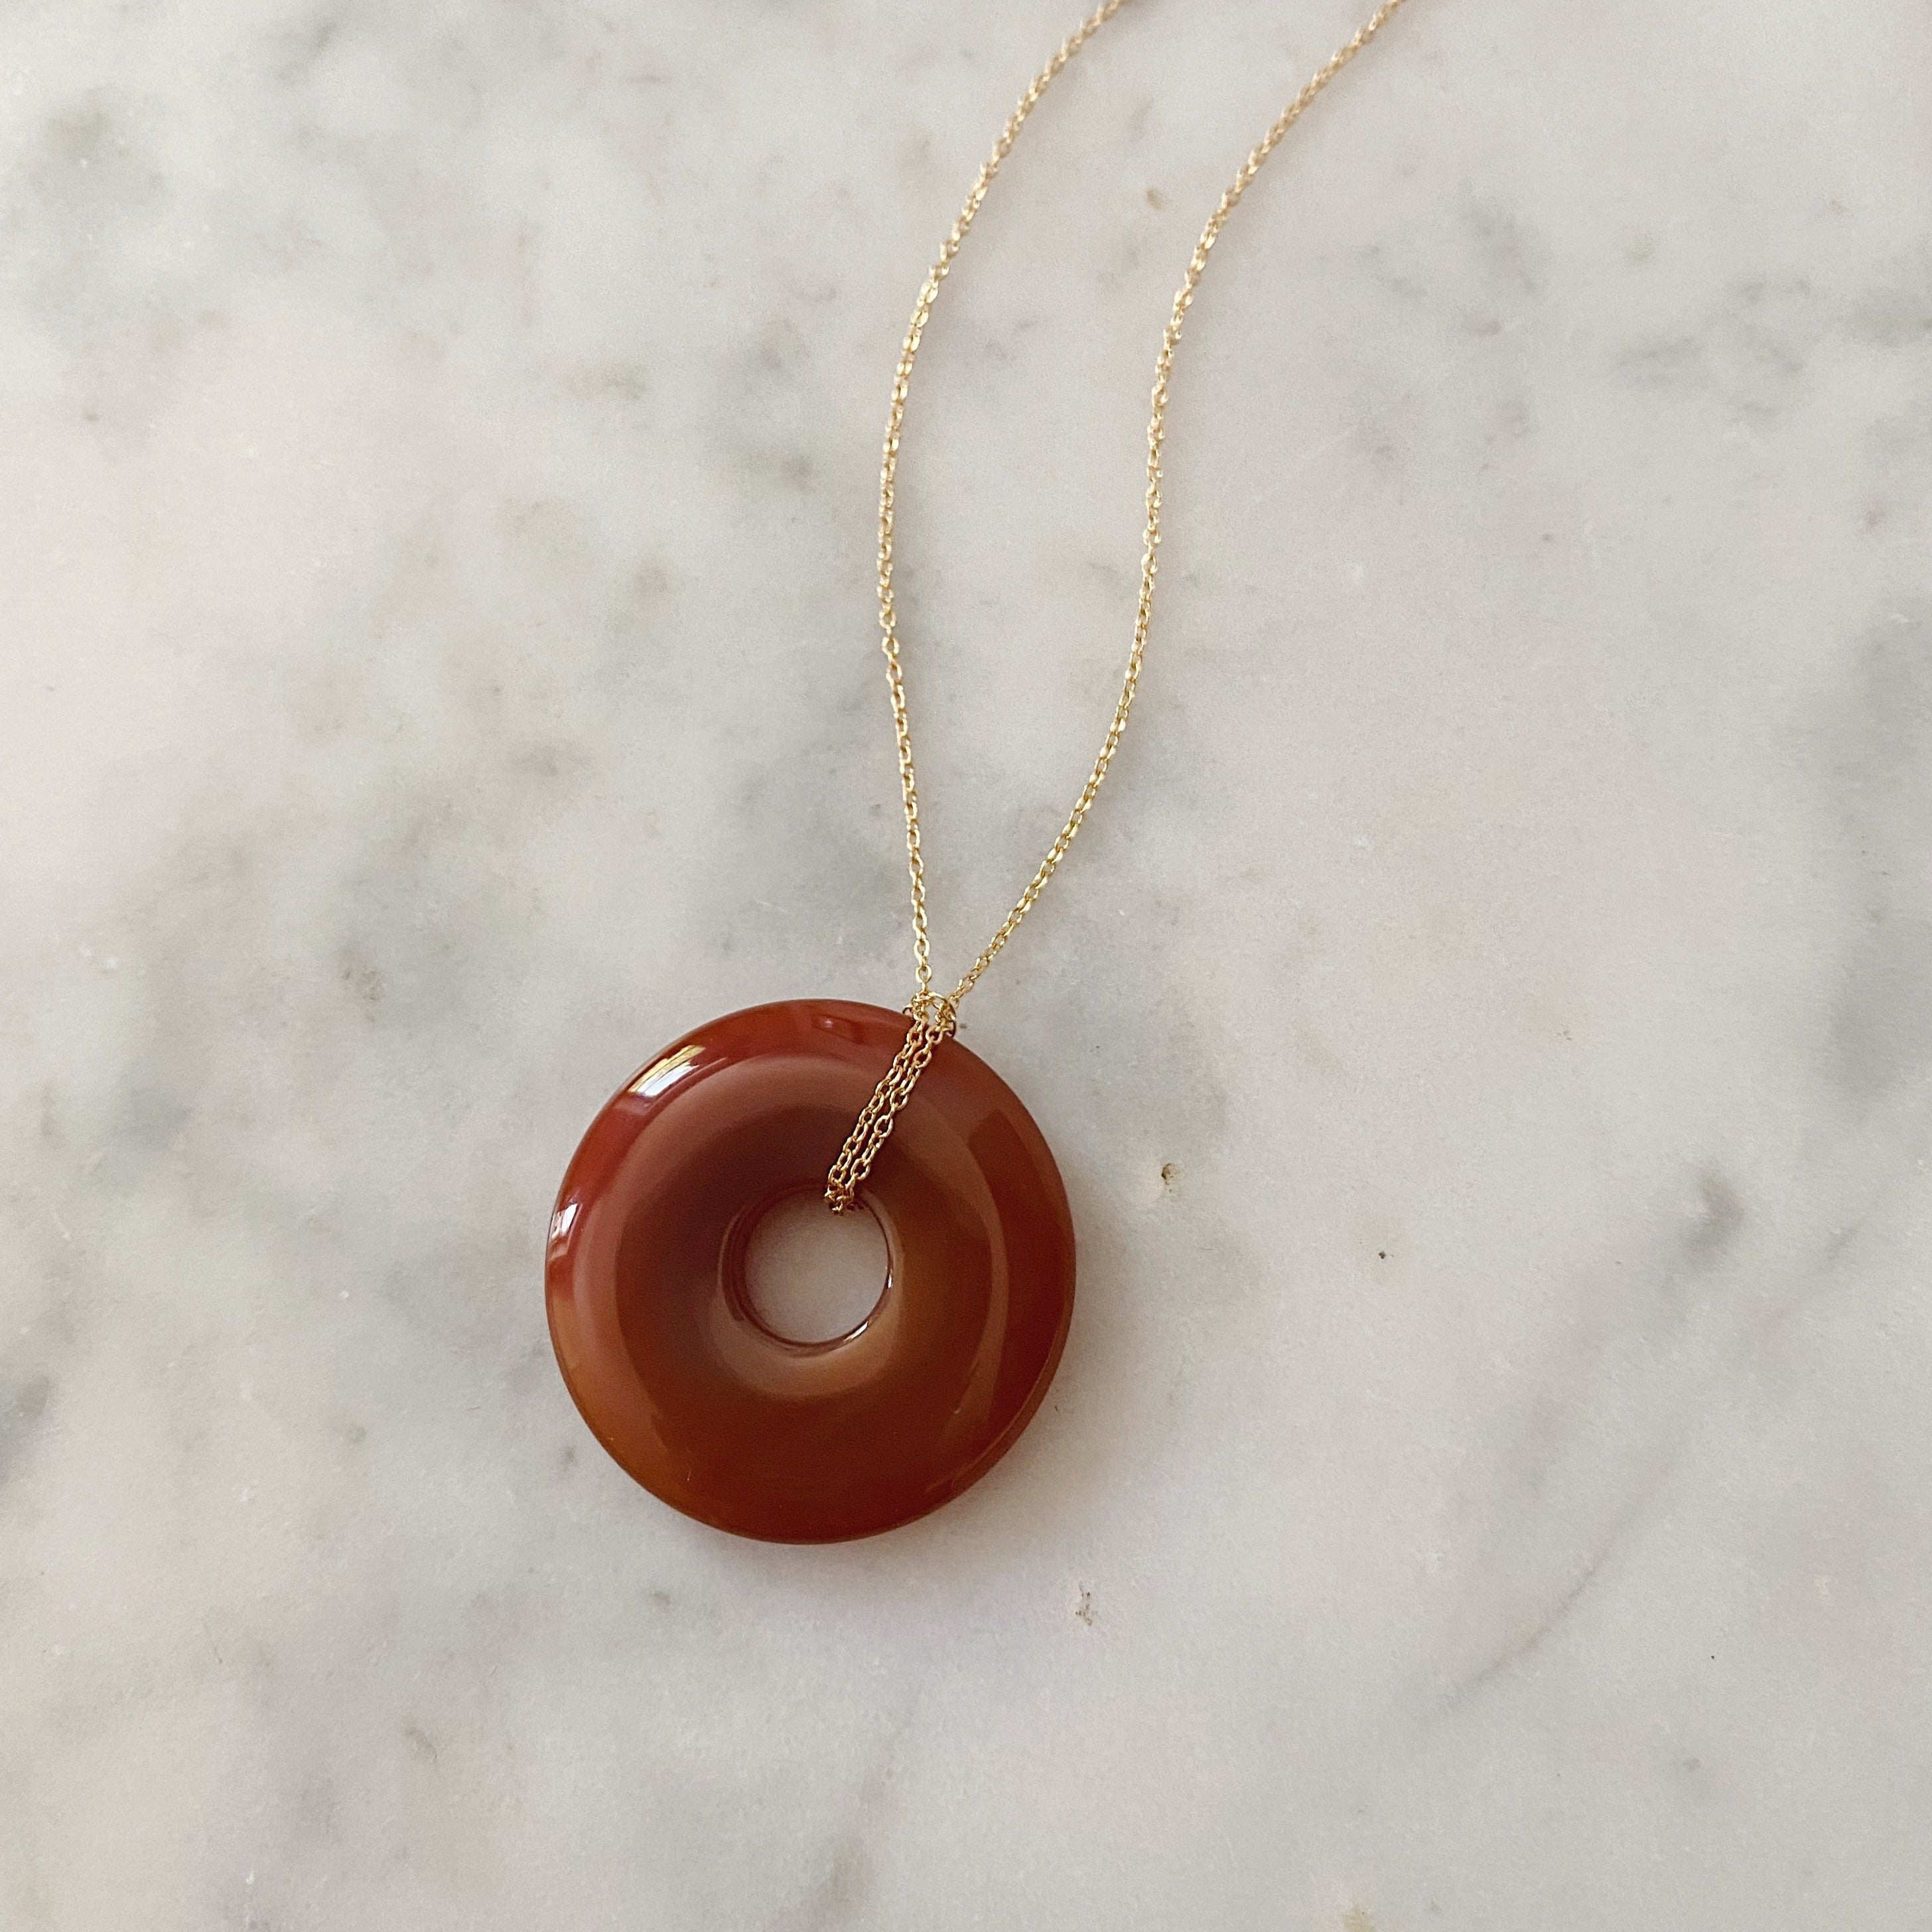 Beignet Necklace - Red Agate